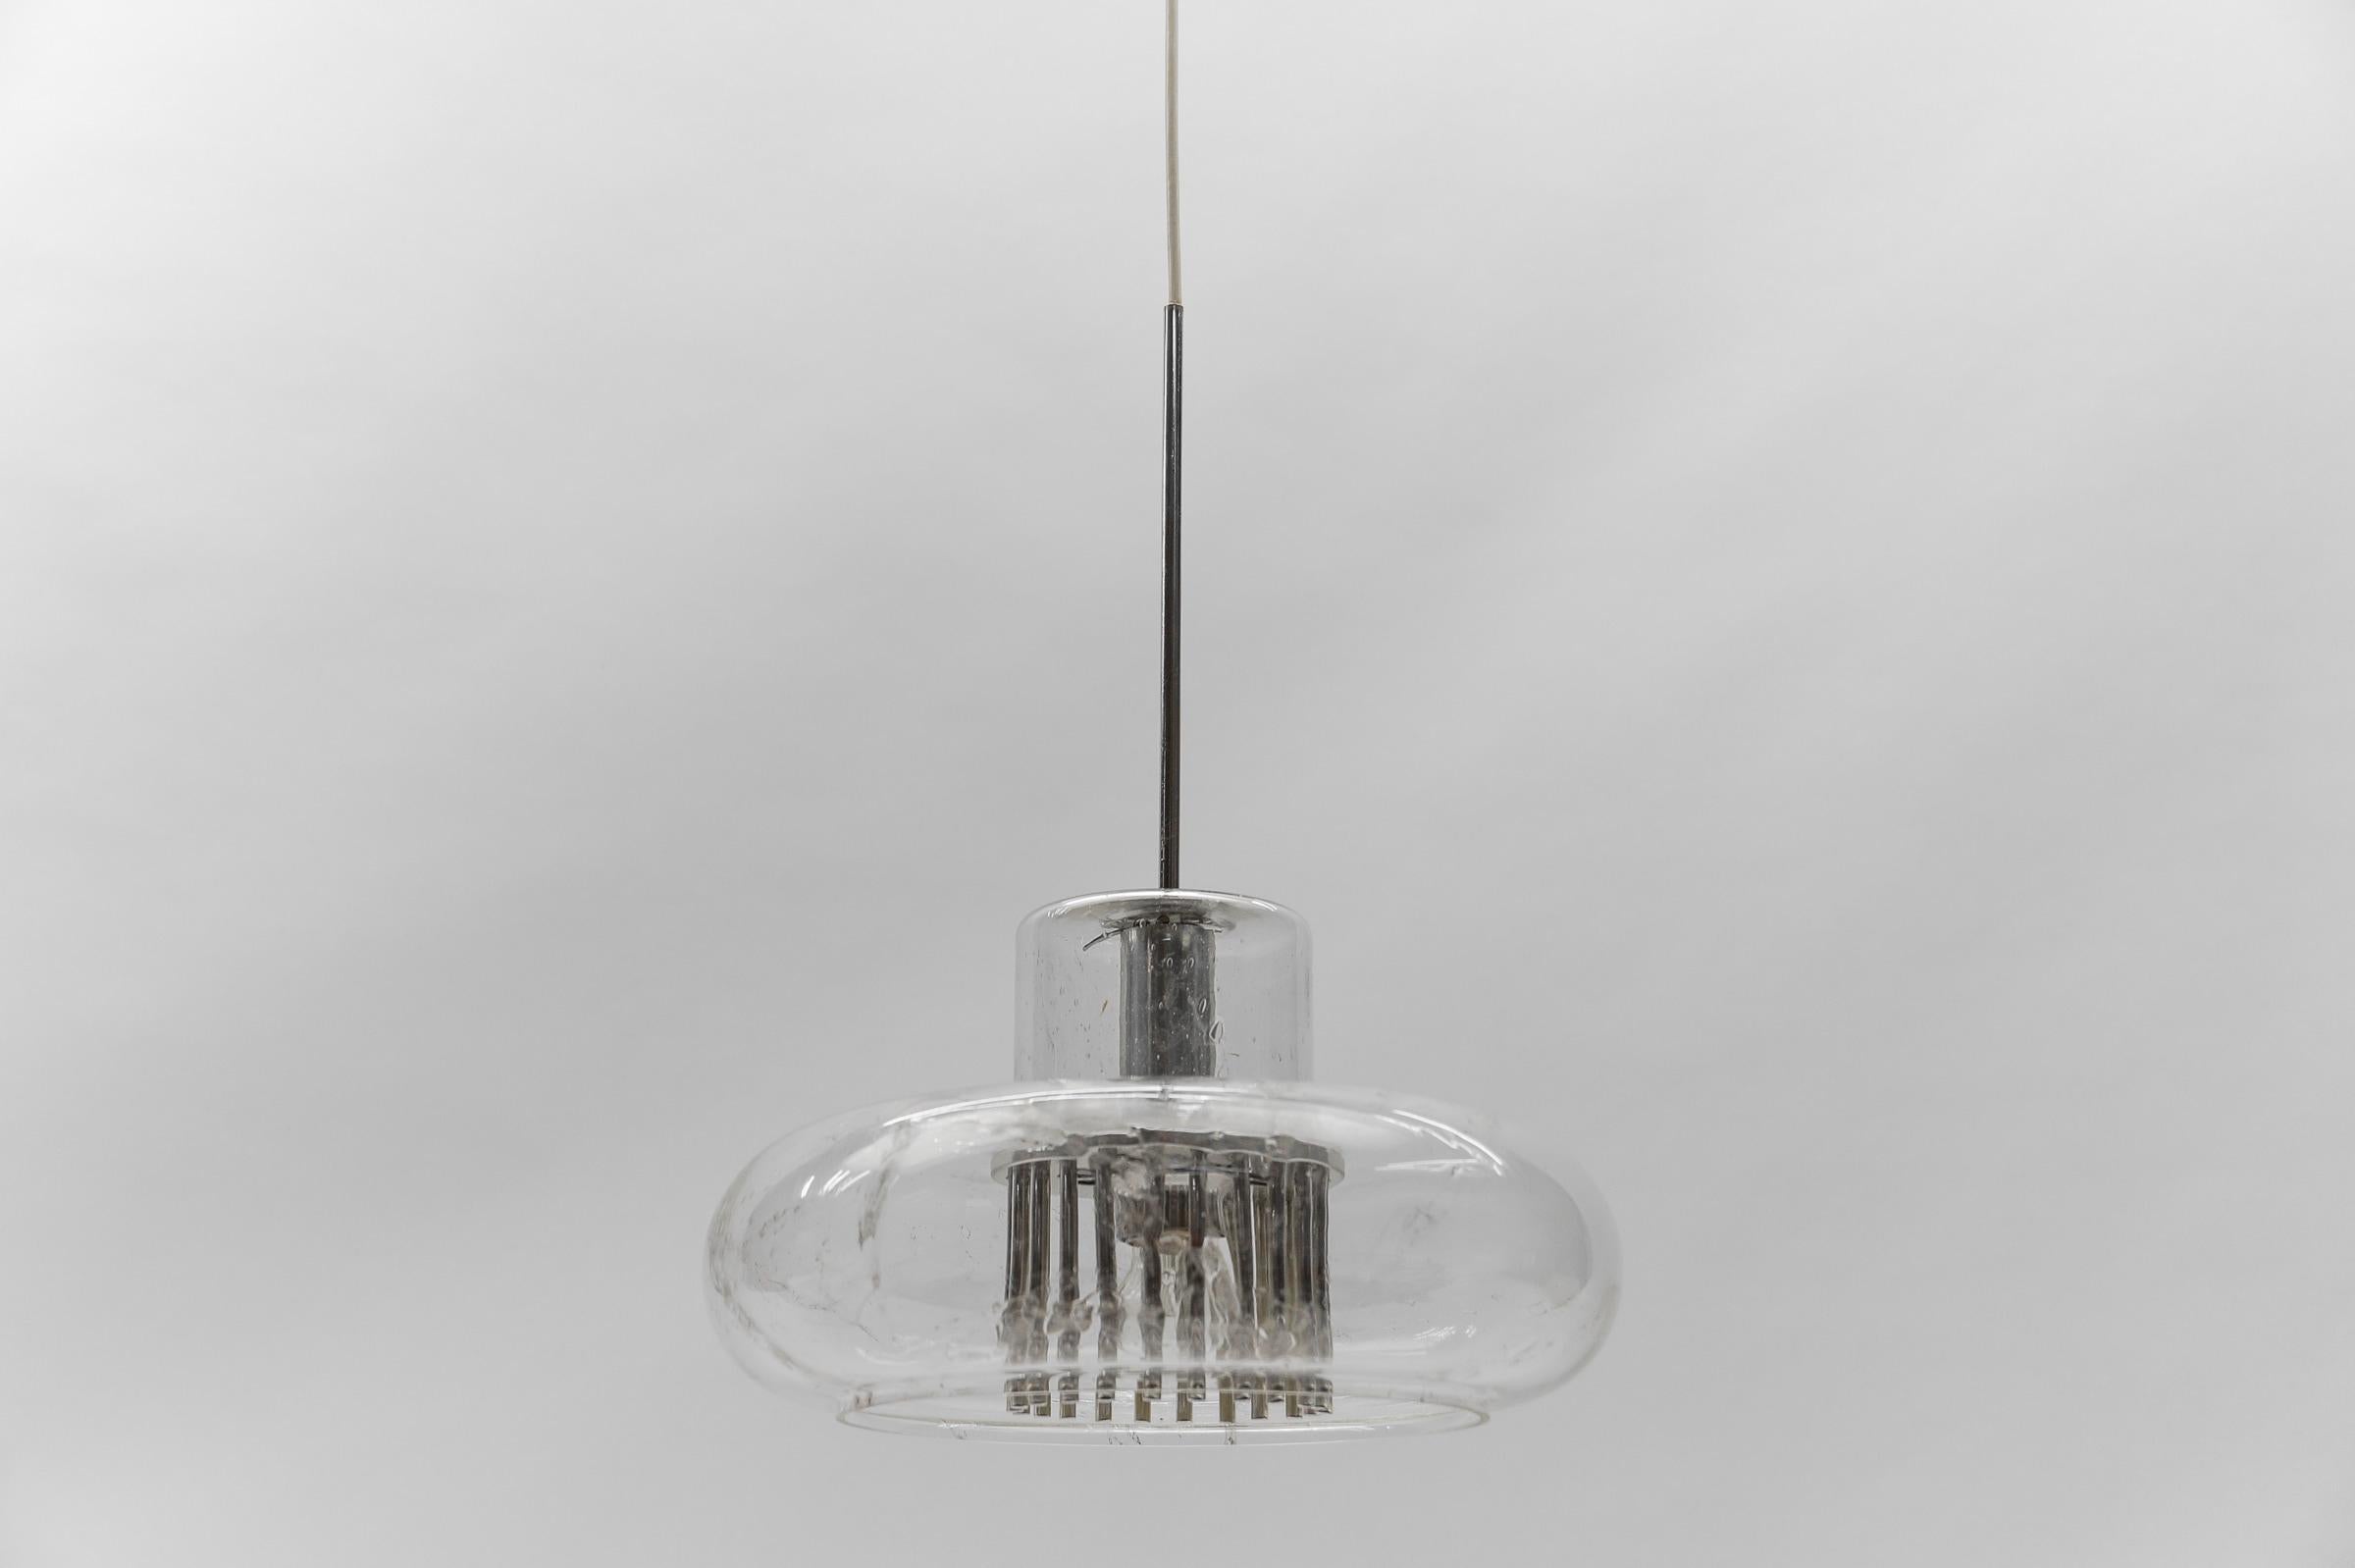 Mid Century Modern Chrome & Glass Pendant Lamp by Doria, 1960s Germany

Dimensions
Diameter: 13.38 in. (34 cm)
Height adjustable: 29.52 - 43.30 in. (75 - 110 cm)

One E27 socket. Works with 220V and 110V.

Our lamps are checked, cleaned and are